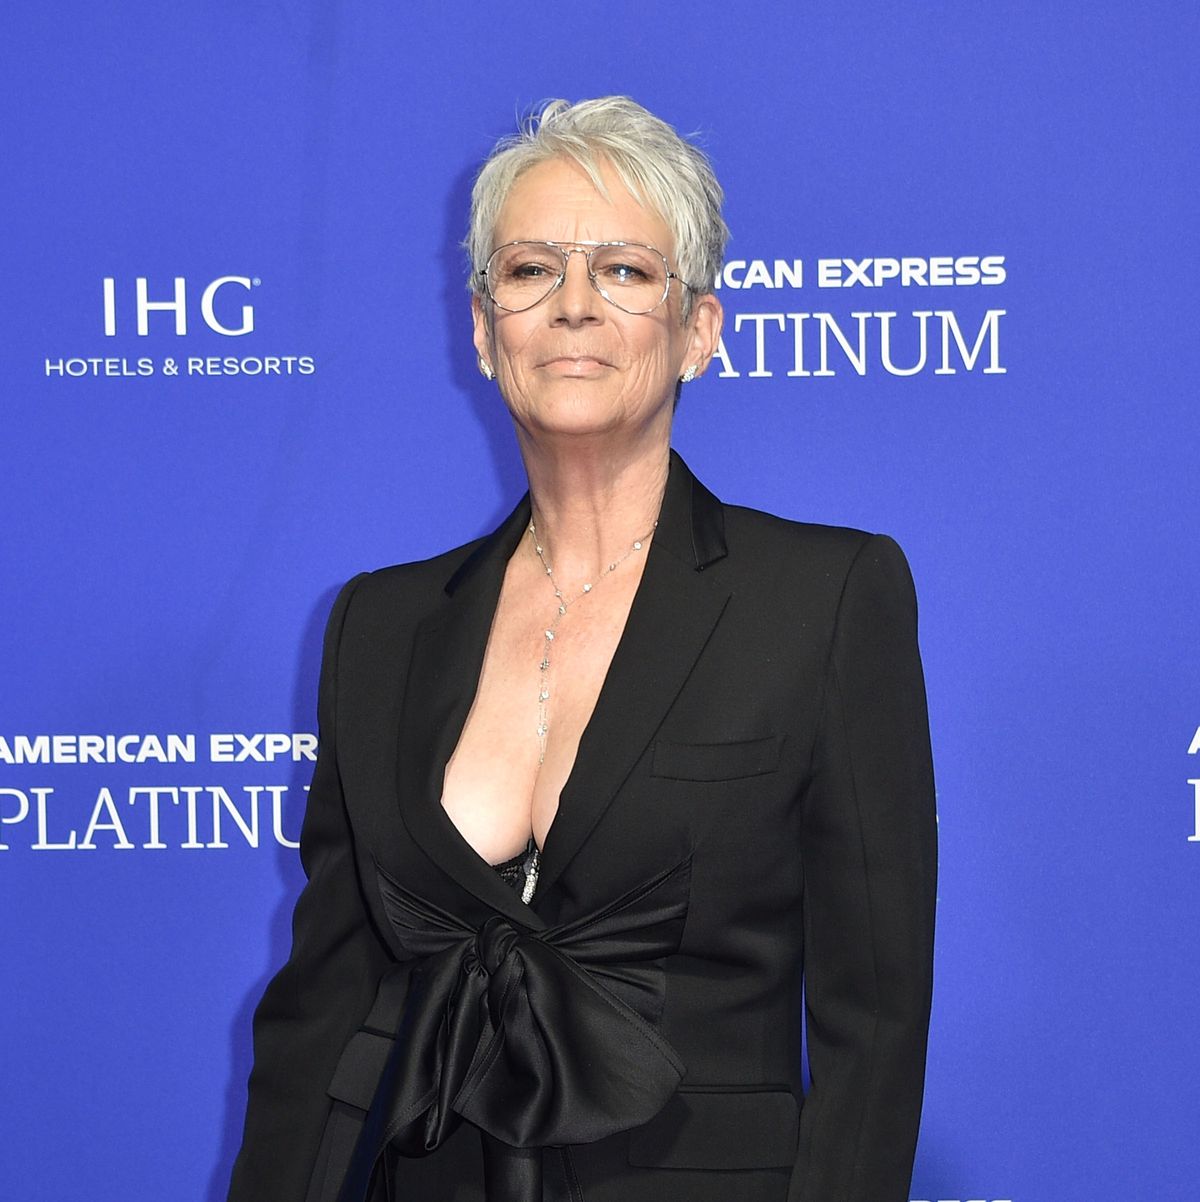 Jamie Lee Curtis, 64, Rocks Plunging Blazer and Lace in New IG